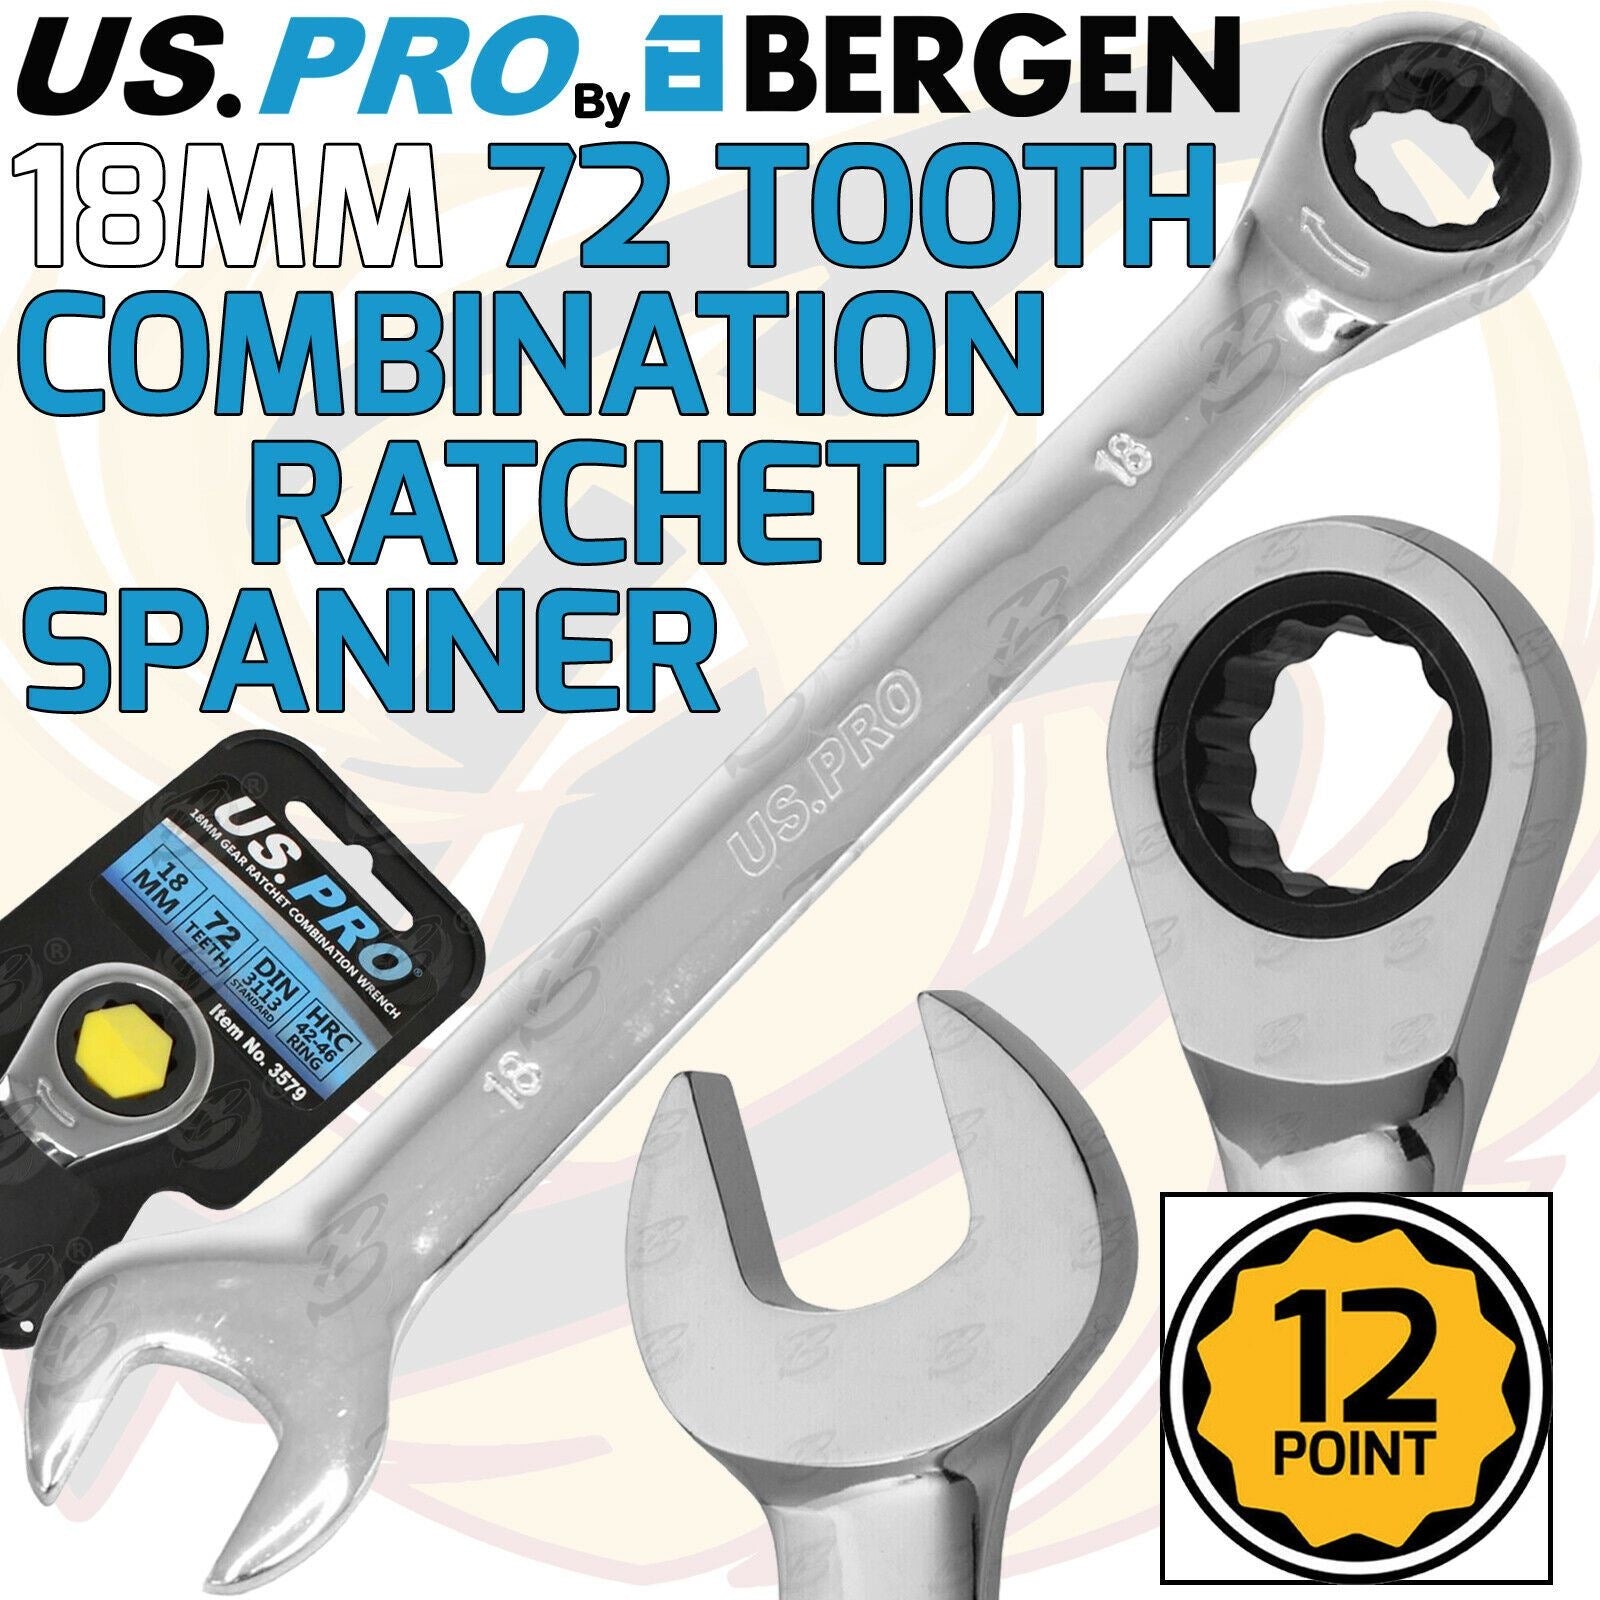 US PRO 18MM 72 TOOTH RATCHET SPANNER